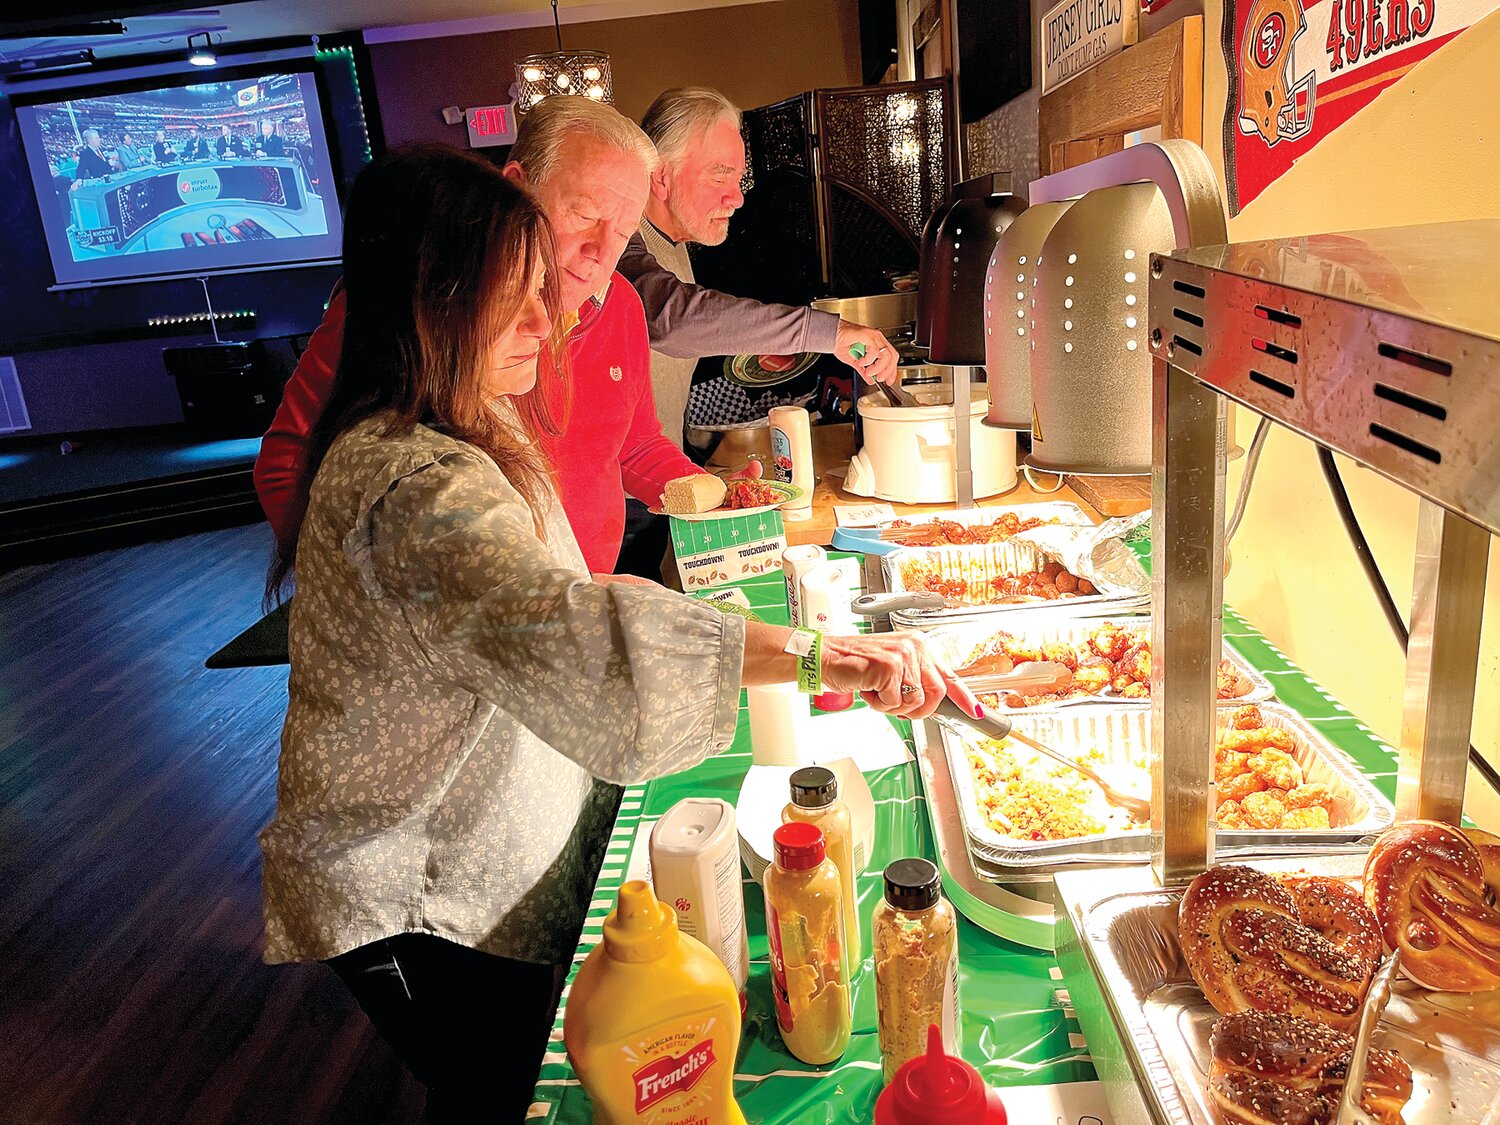 Members enjoy the buffet during the Lambertville Elks Lodge 1070 event on Super Bowl Sunday.